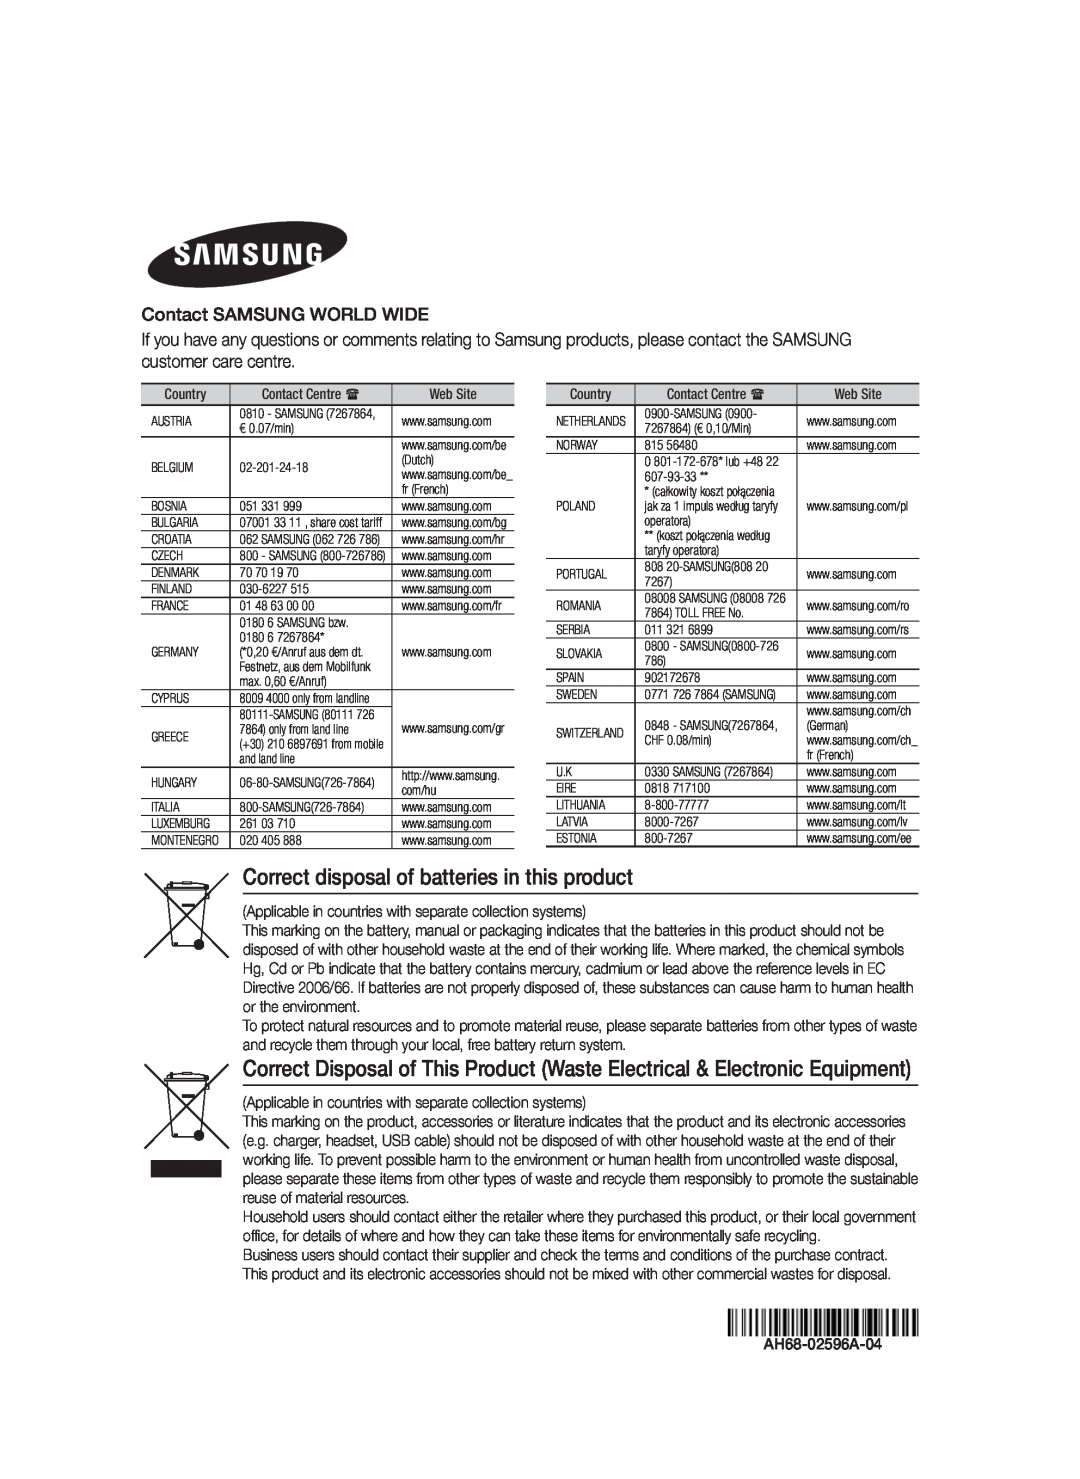 Samsung HT-F5200/EN, HT-FS5200/XN, HT-F5200/XN Correct disposal of batteries in this product, Contact SAMSUNG WORLD WIDE 